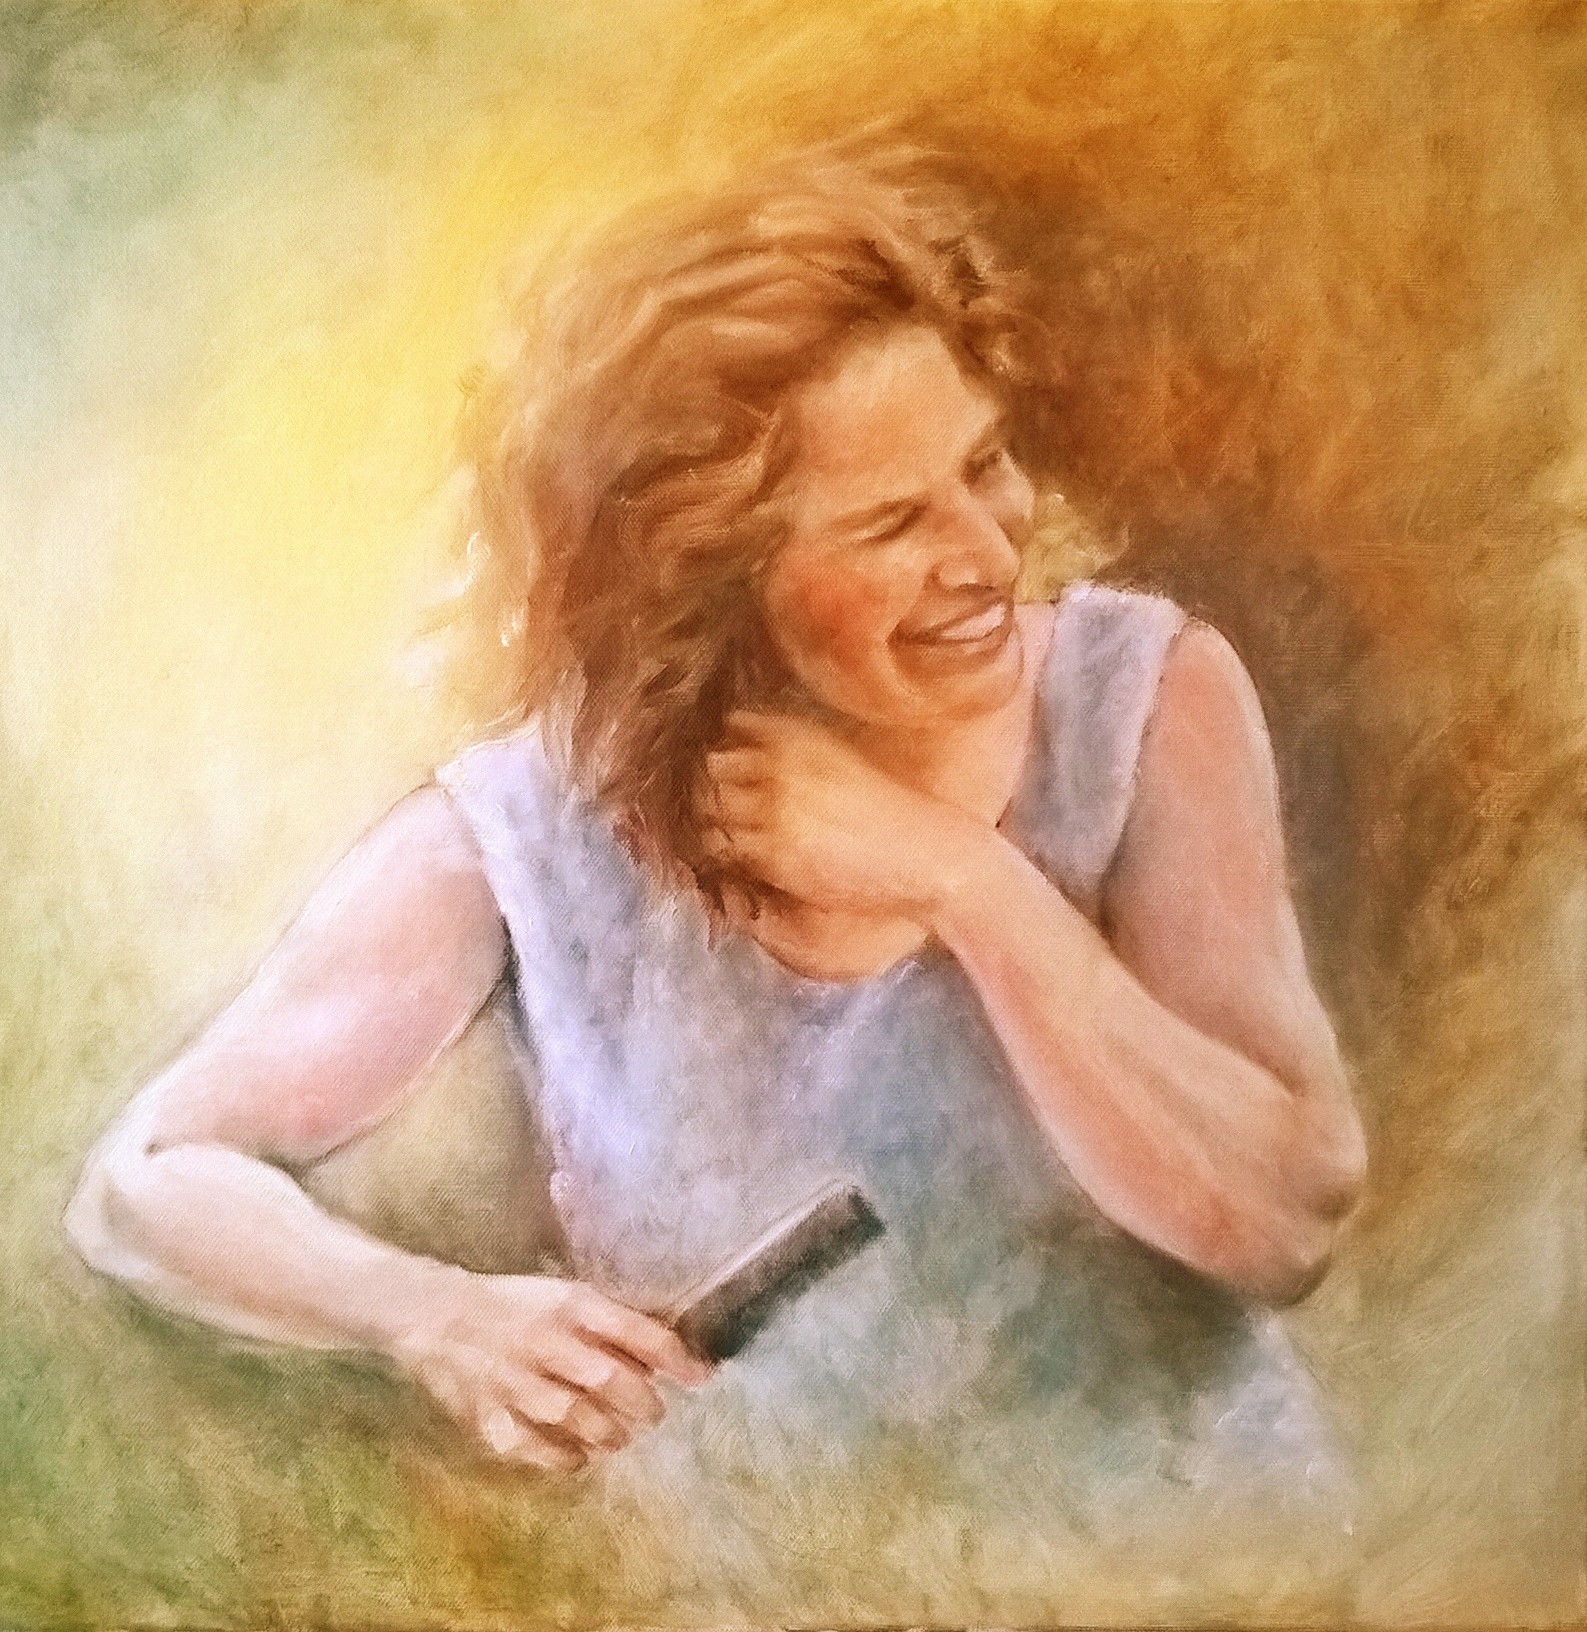 Painting by Anna Sue Wilcox "The Joy Moment"